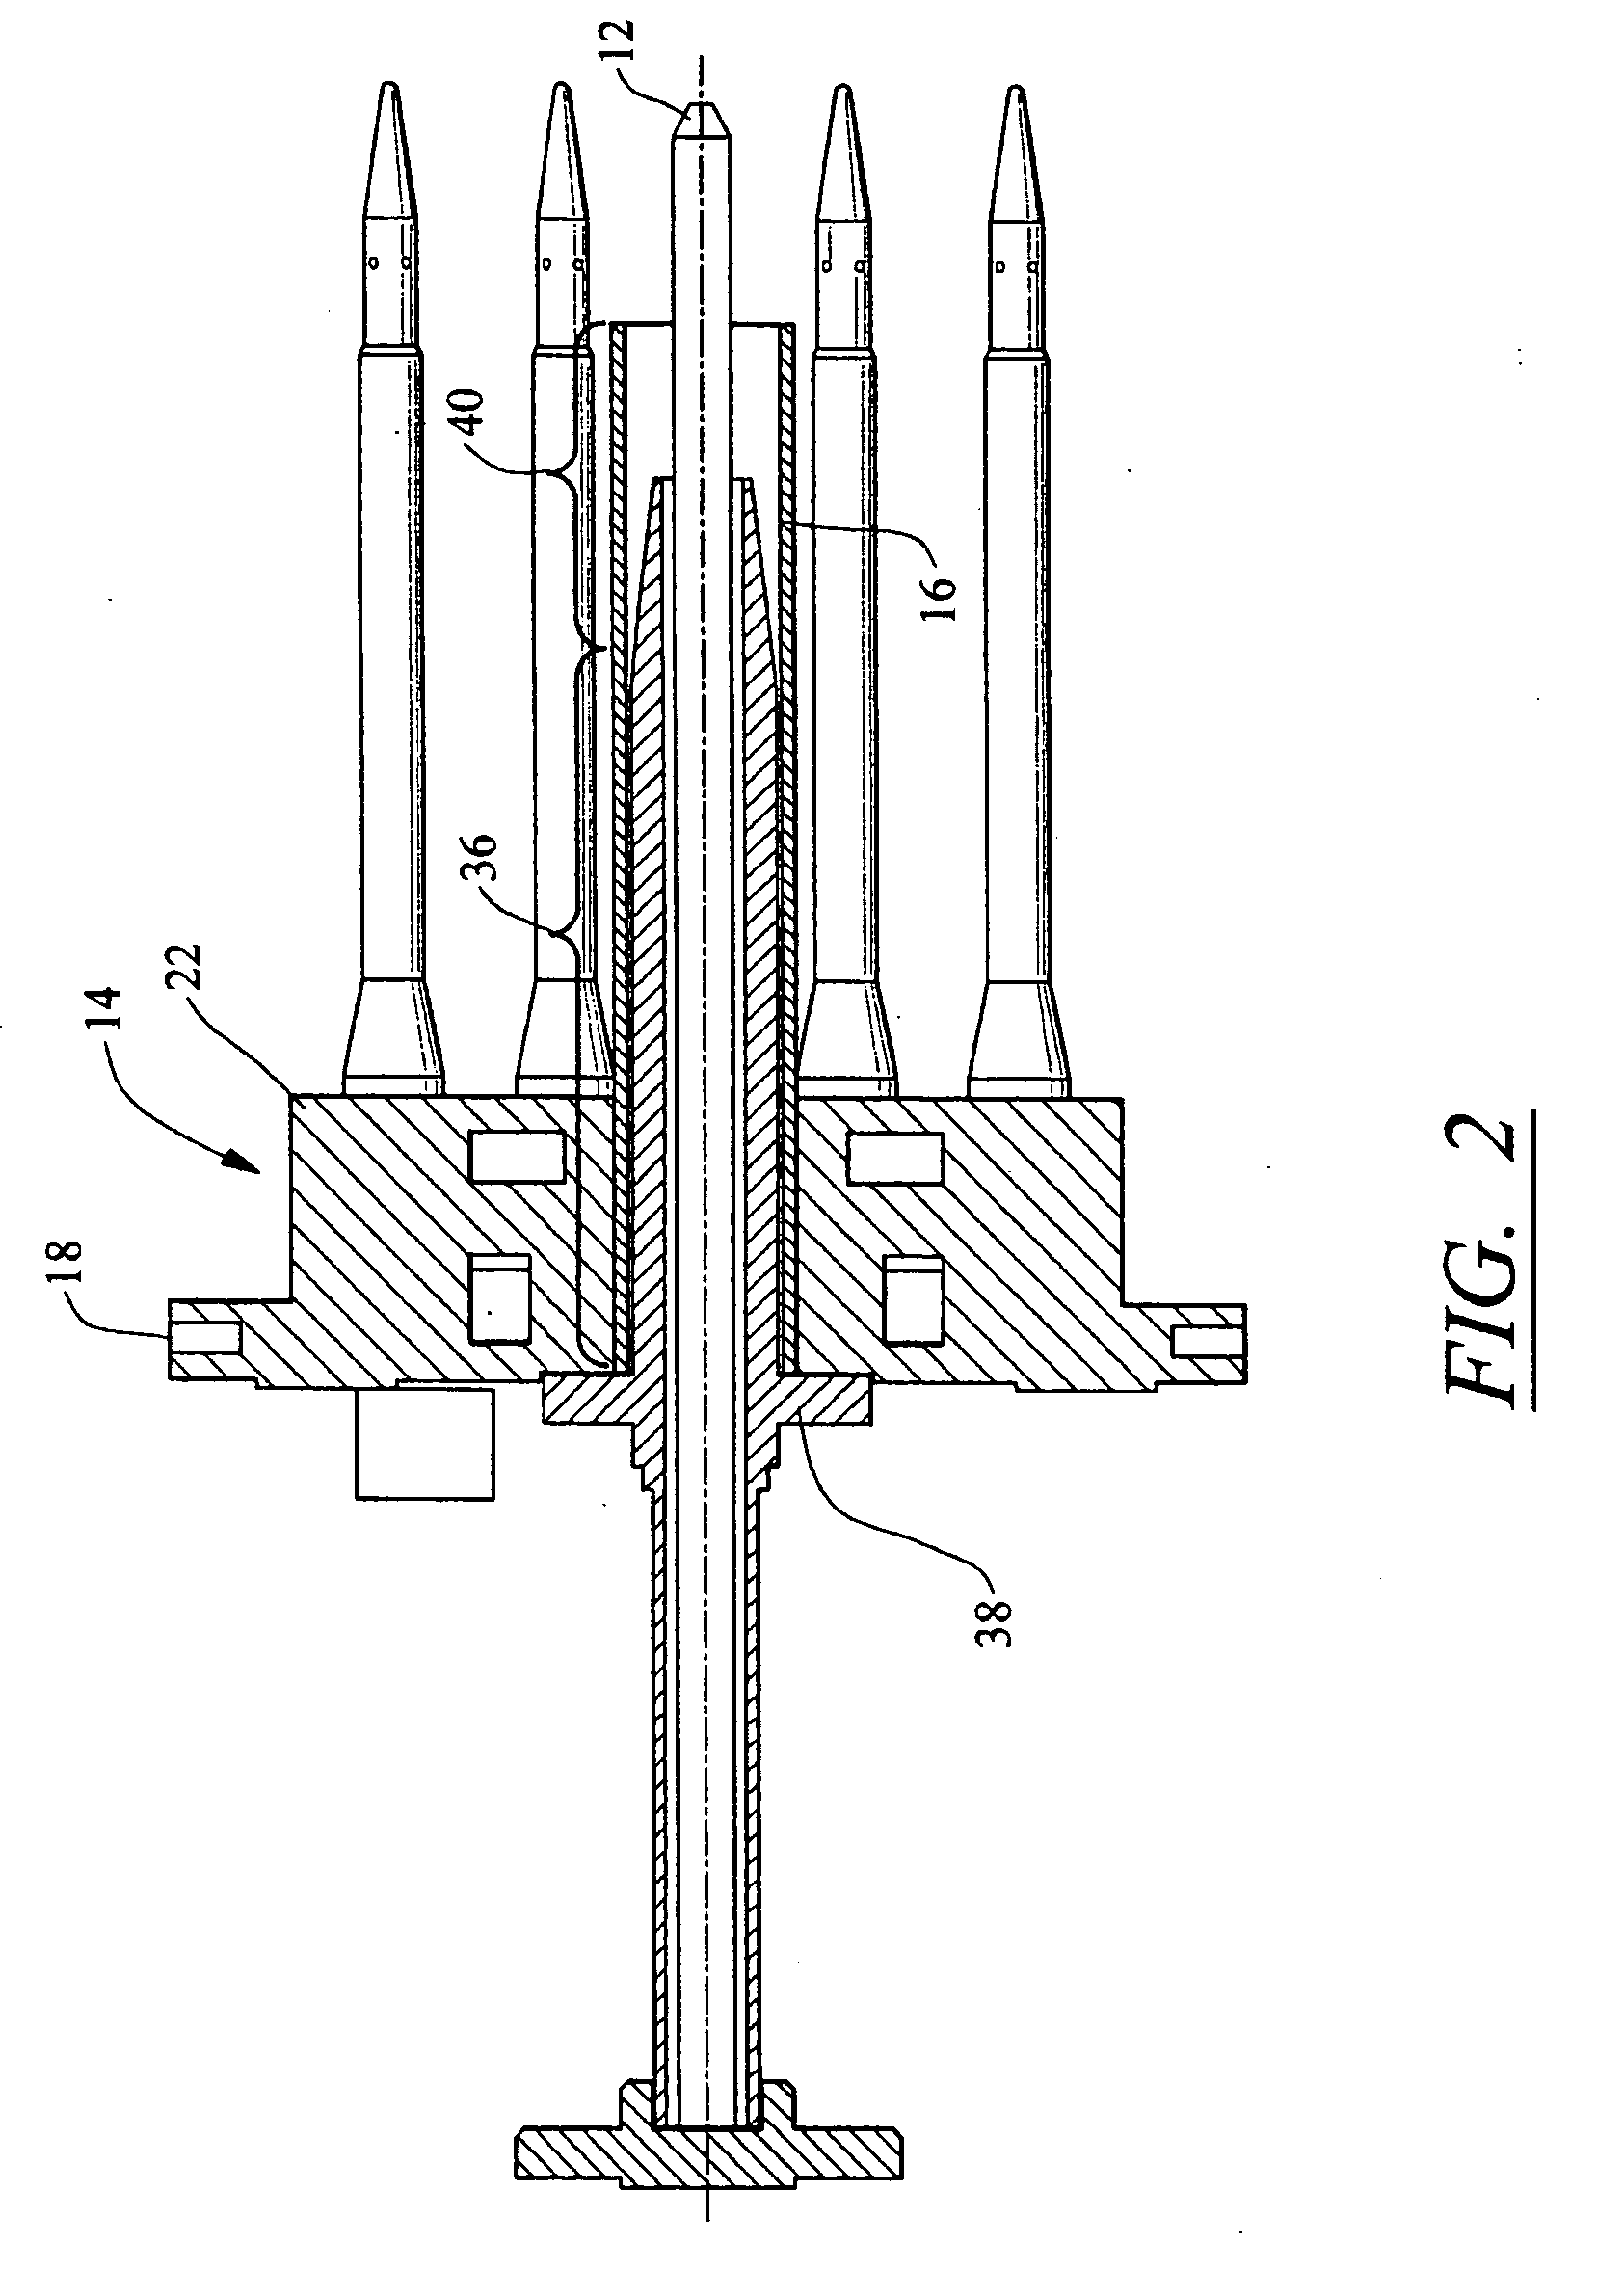 Support system for a pilot nozzle of a turbine engine